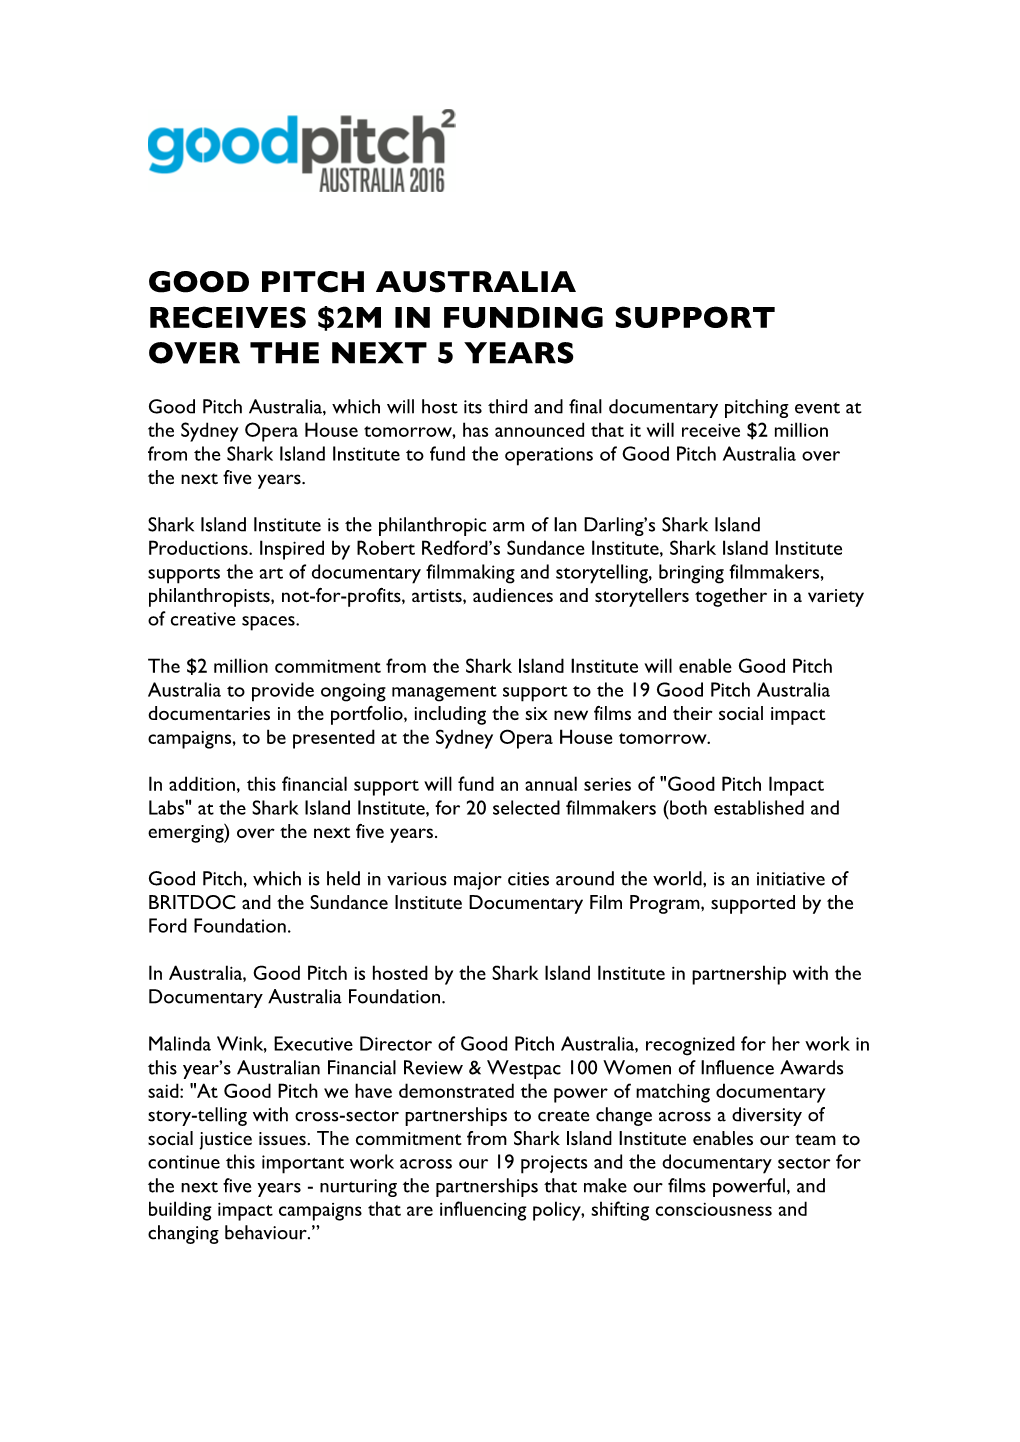 Good Pitch Australia Receives $2M in Funding Support Over the Next 5 Years